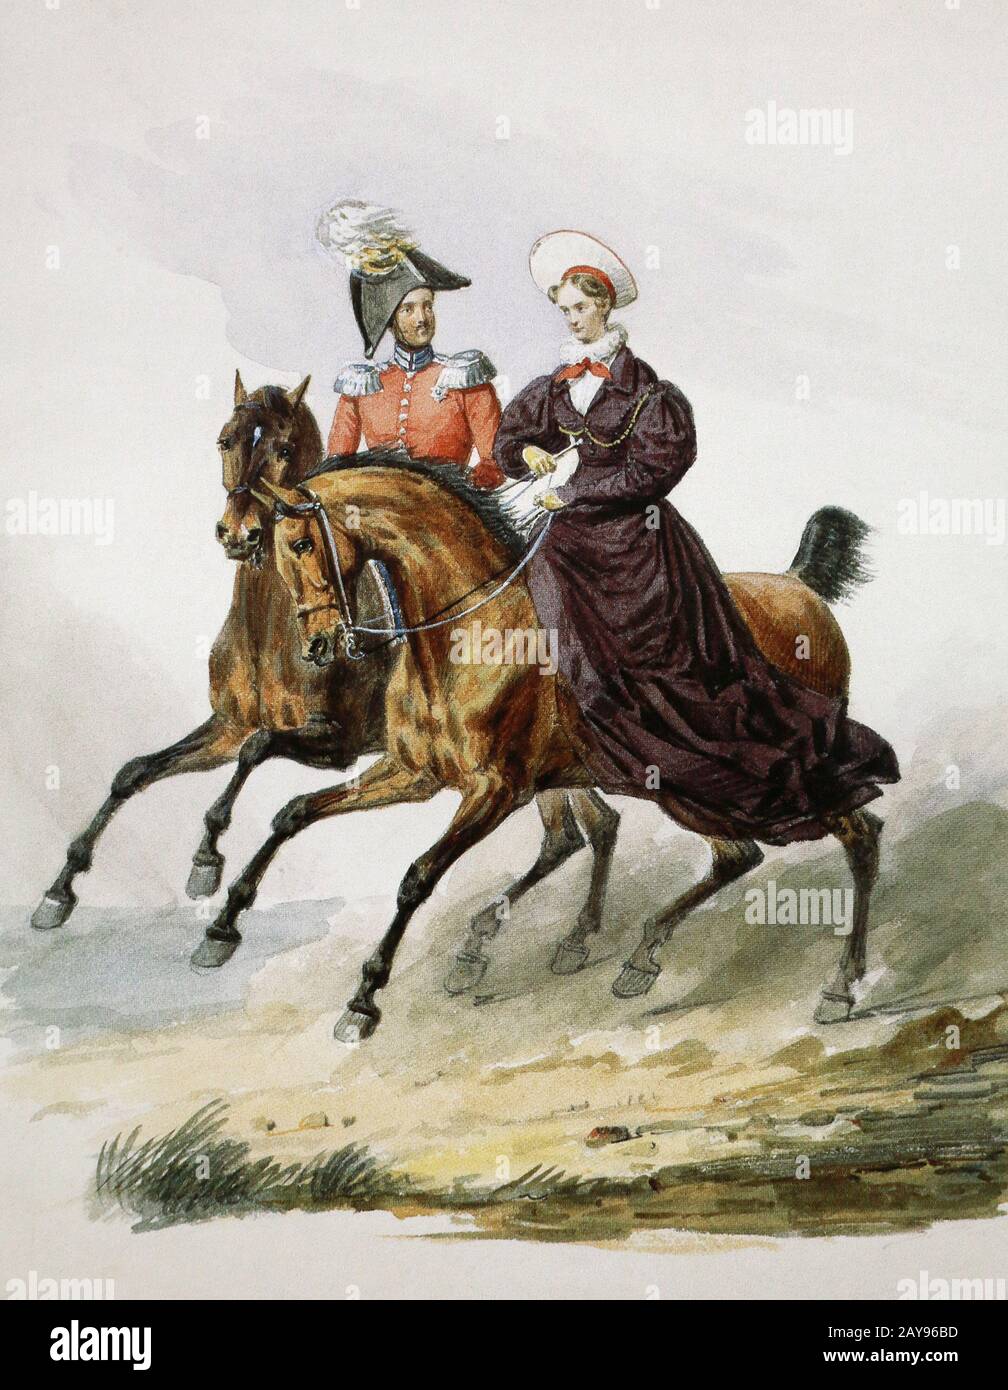 Russian Emperor Nicholas I Pavlovich and Empress Alexandra Fedorovna. Painting by F. Kruger, 19th century. Stock Photo